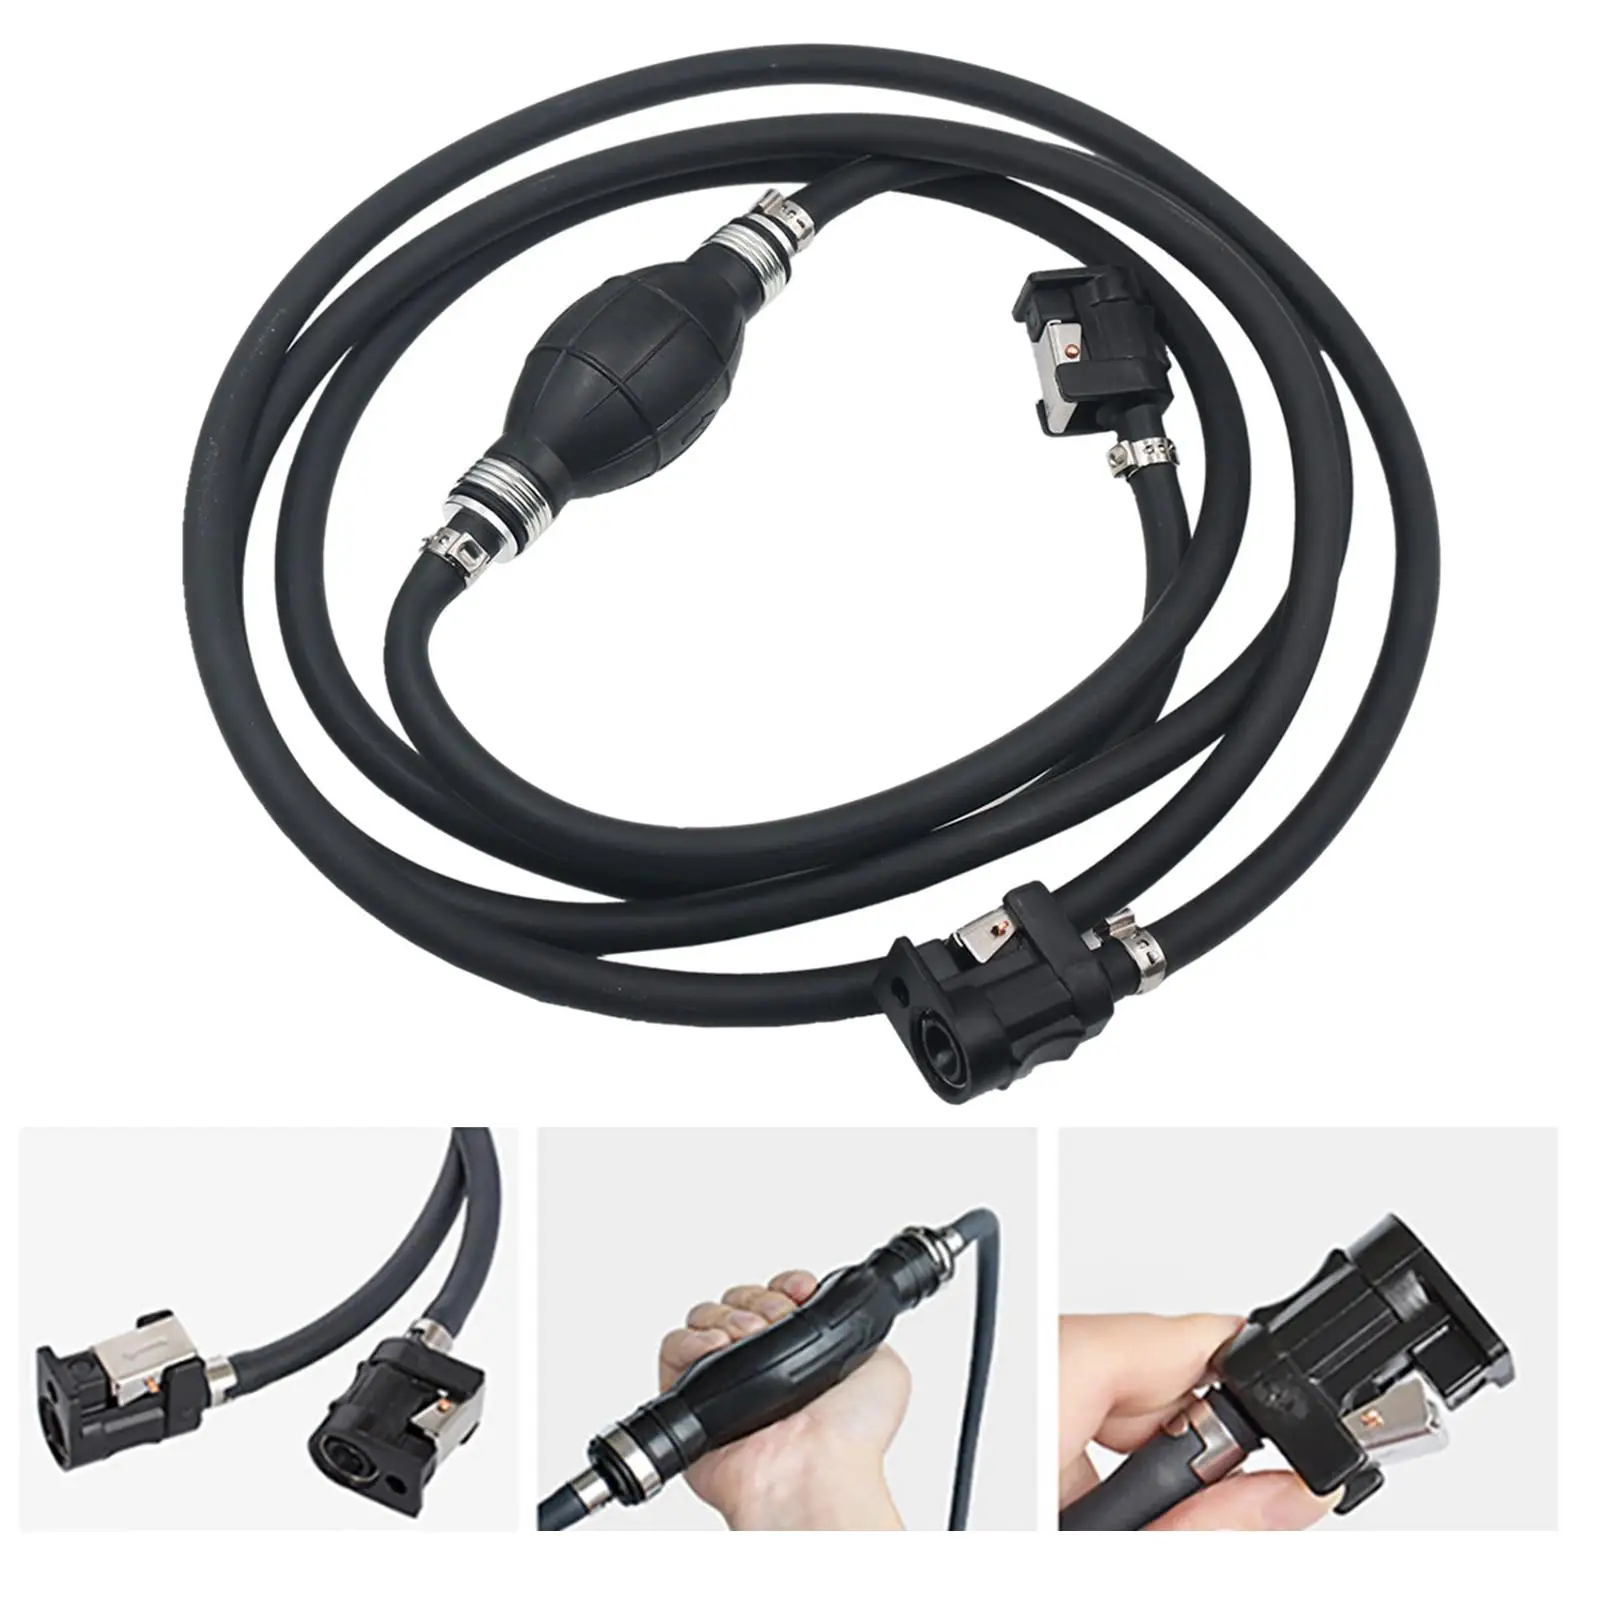 8mm 3.1M Hand Pump Engine Parts Boat Fuel Line Assembly for Motor Vehicle Marine